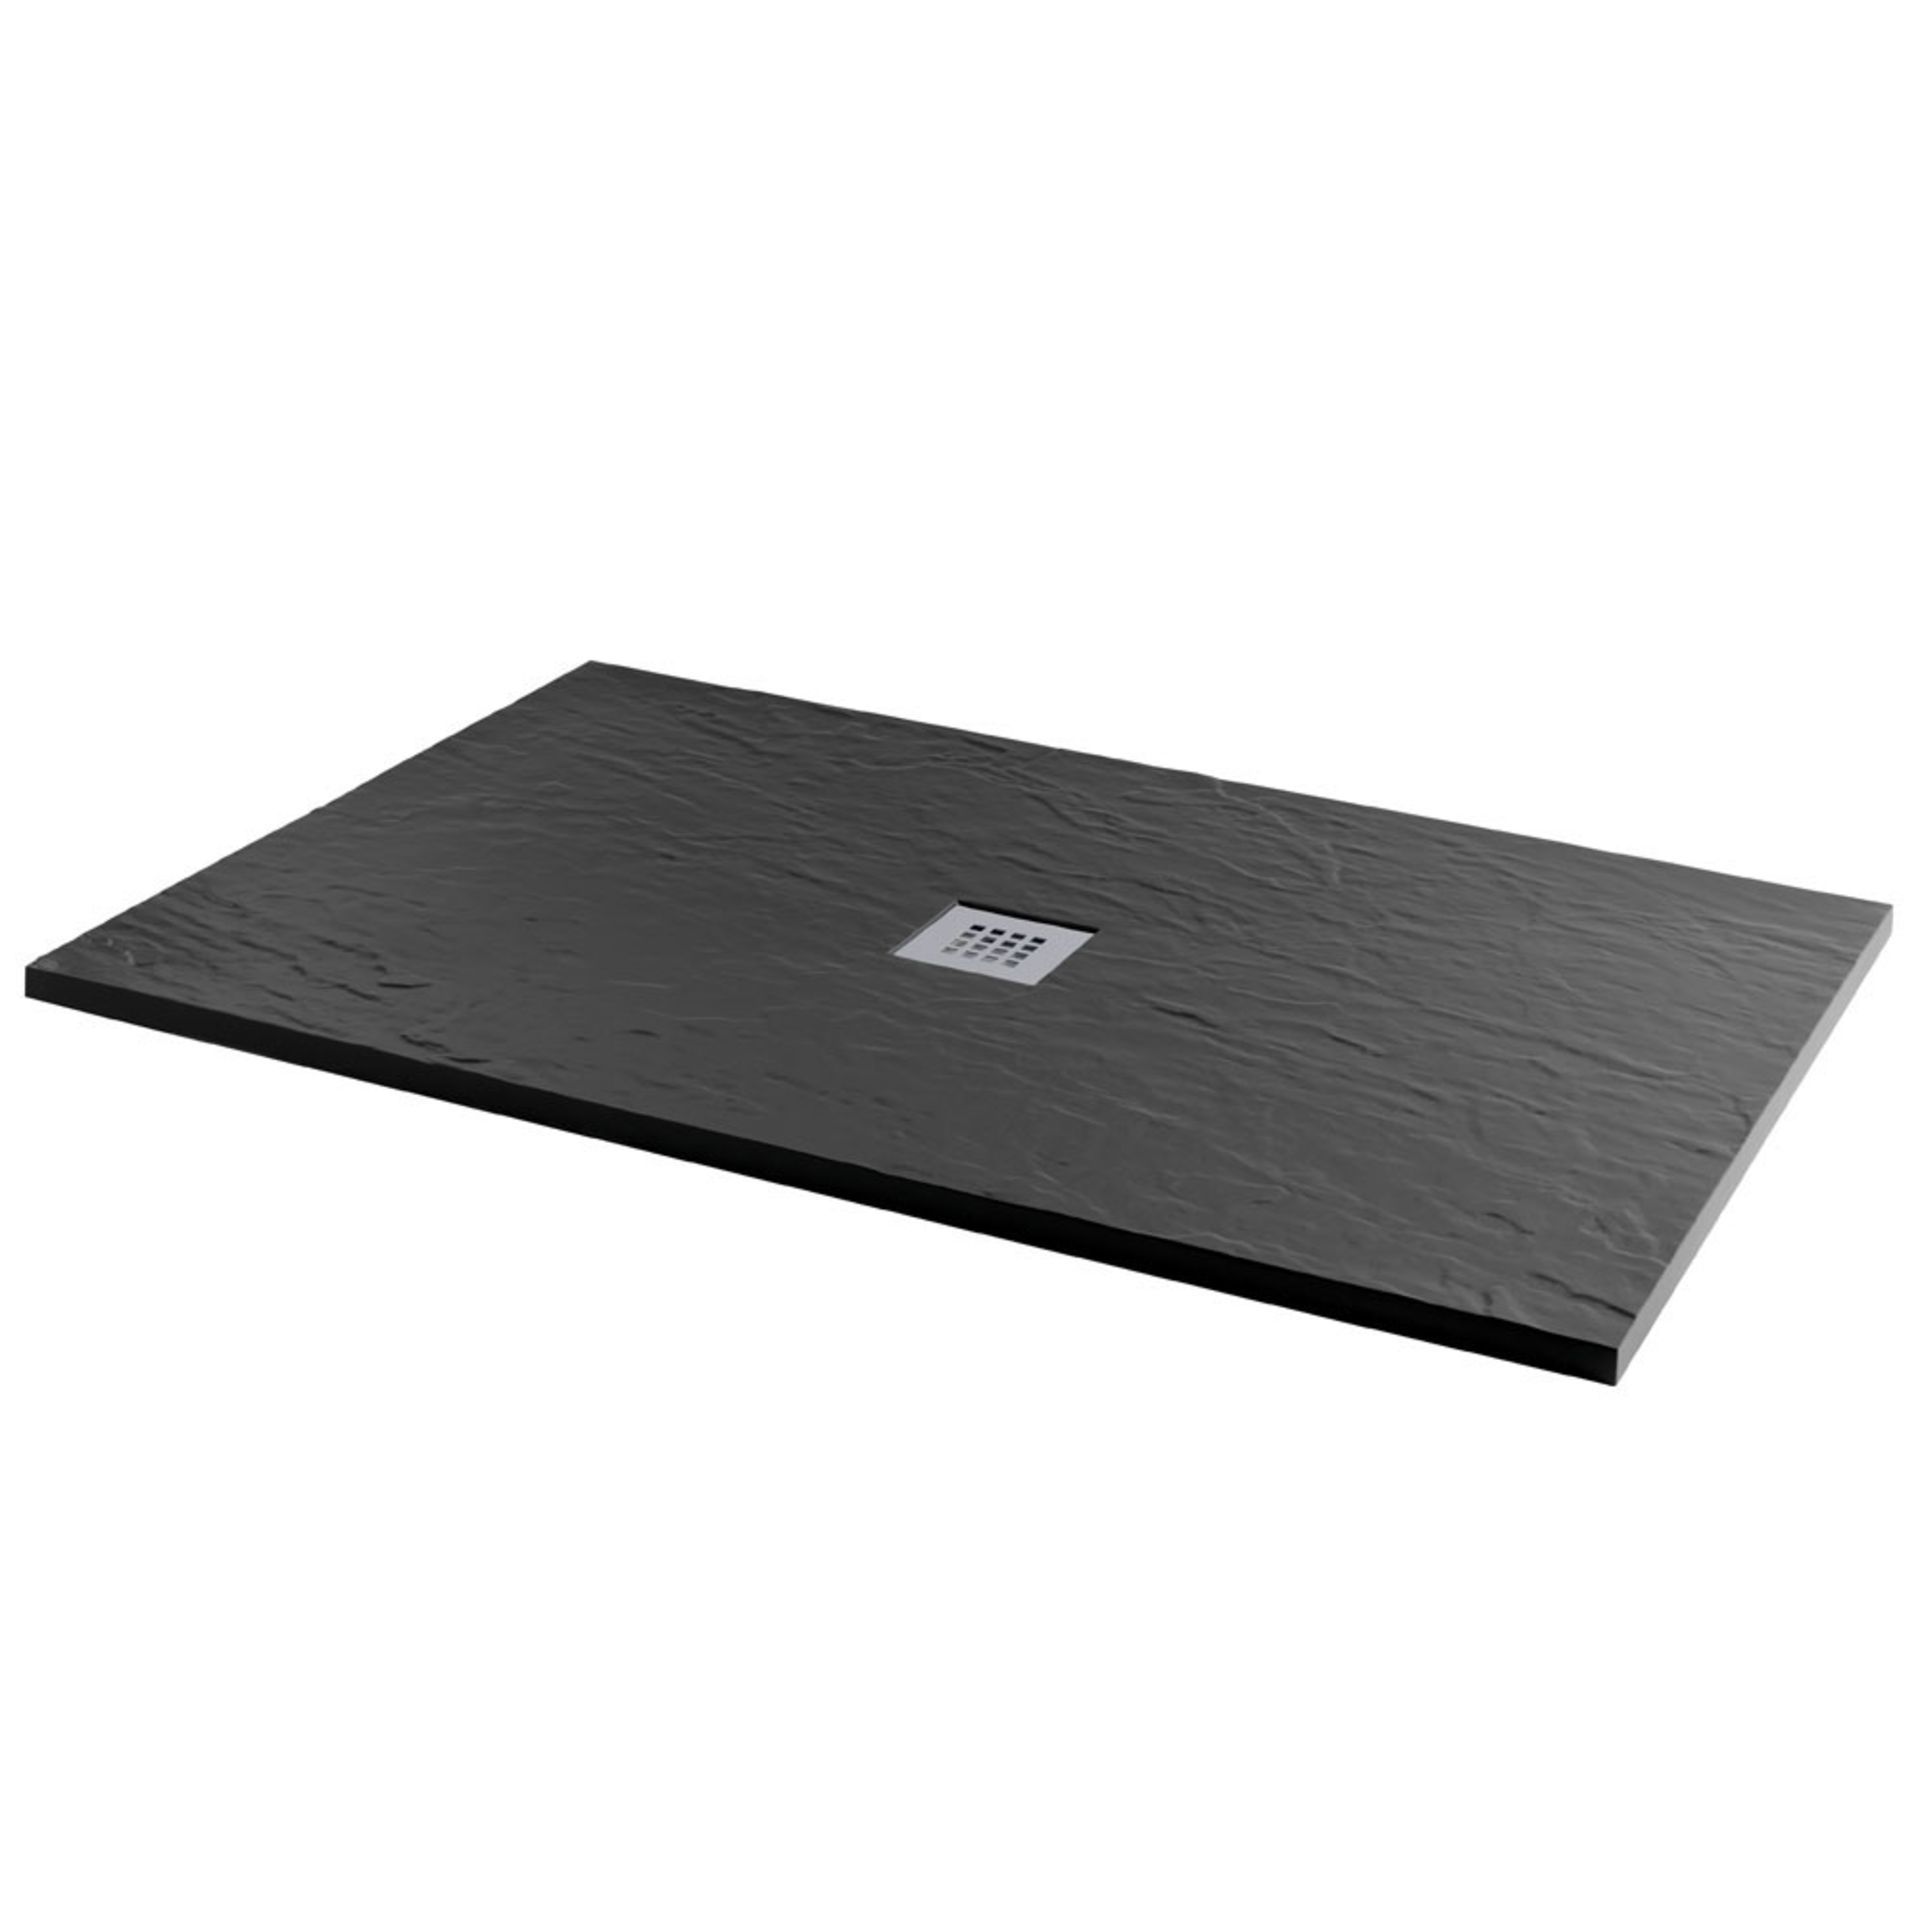 New 1000x800mm Rectangle Black Slate Effect Shower Tray. RRP £569.99.A Textured Black Slate E... - Image 2 of 2